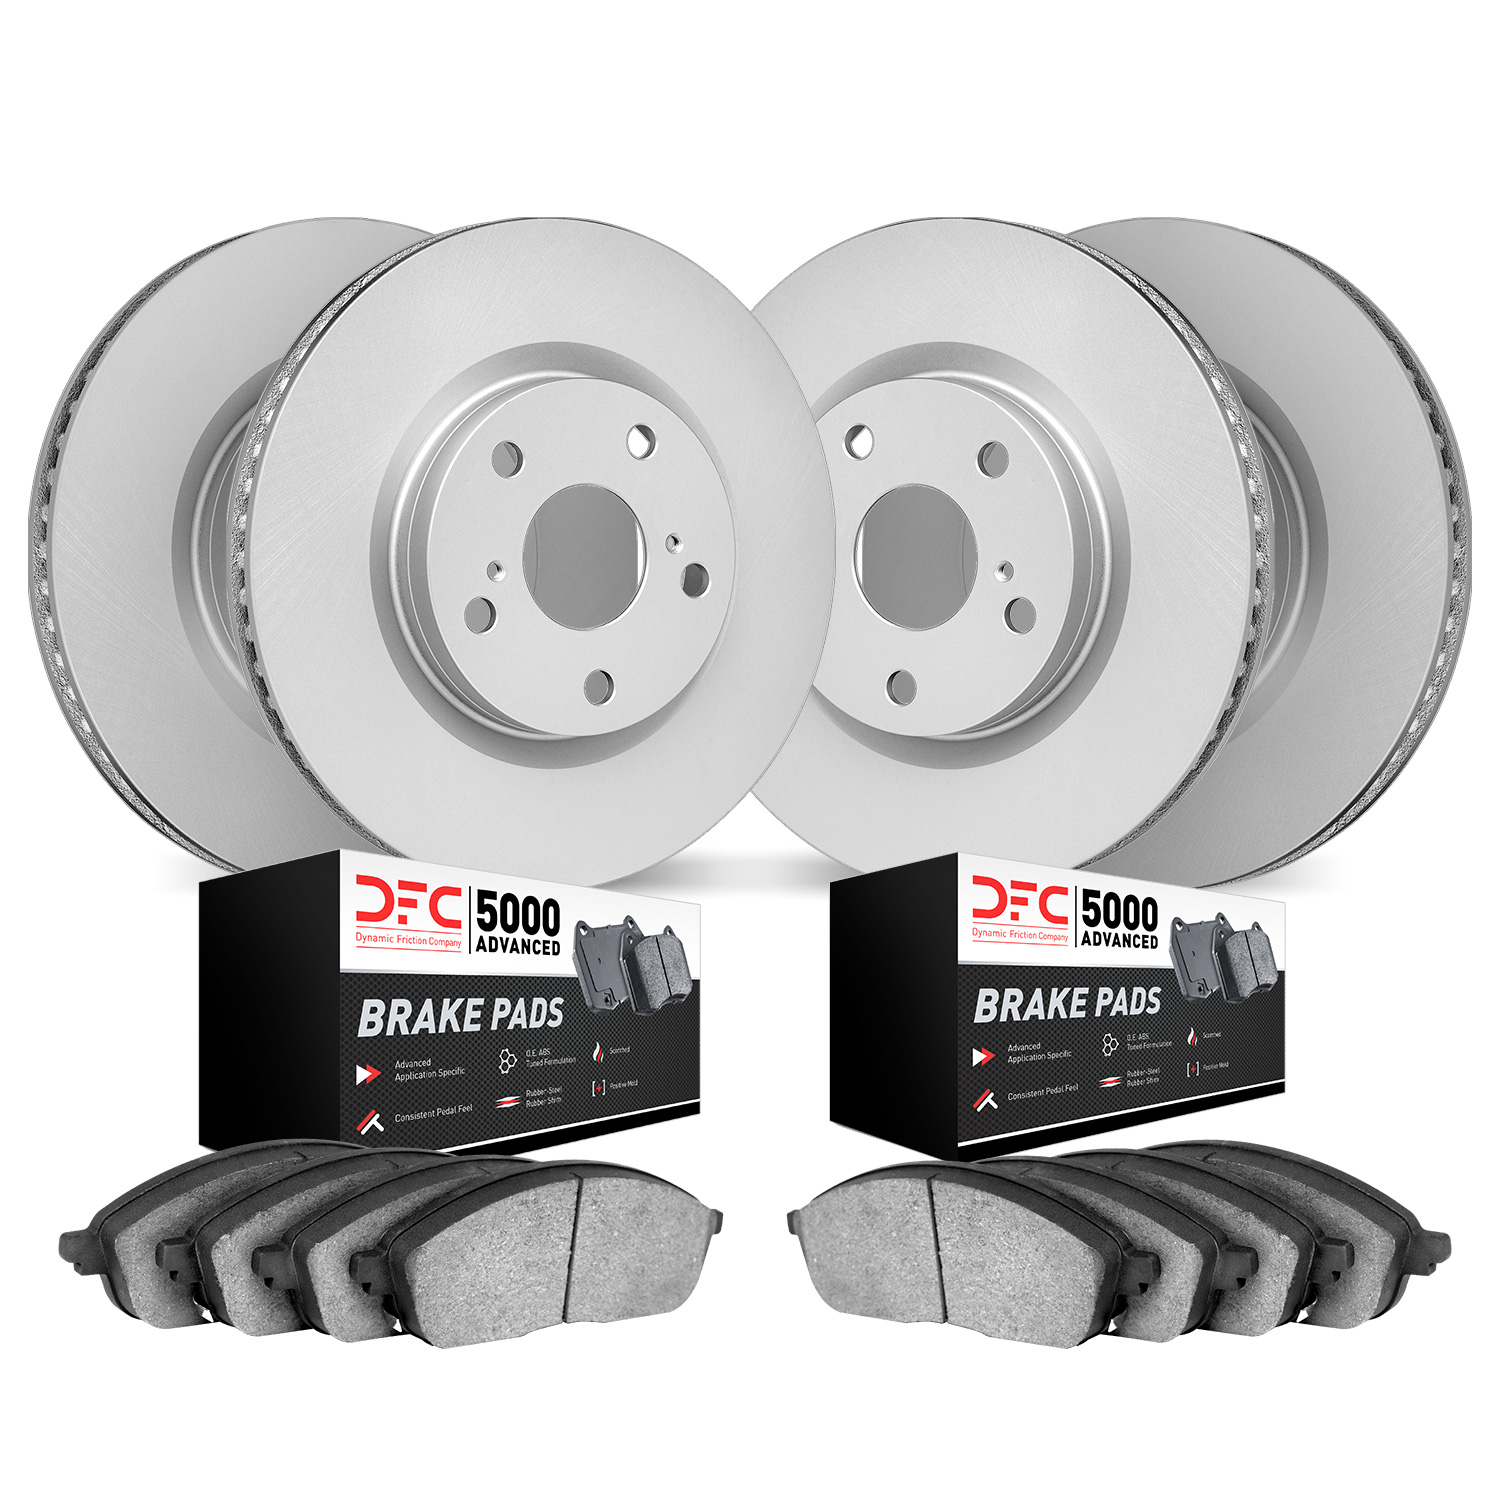 4504-80008 Geospec Brake Rotors w/5000 Advanced Brake Pads Kit, 2004-2011 Ford/Lincoln/Mercury/Mazda, Position: Front and Rear